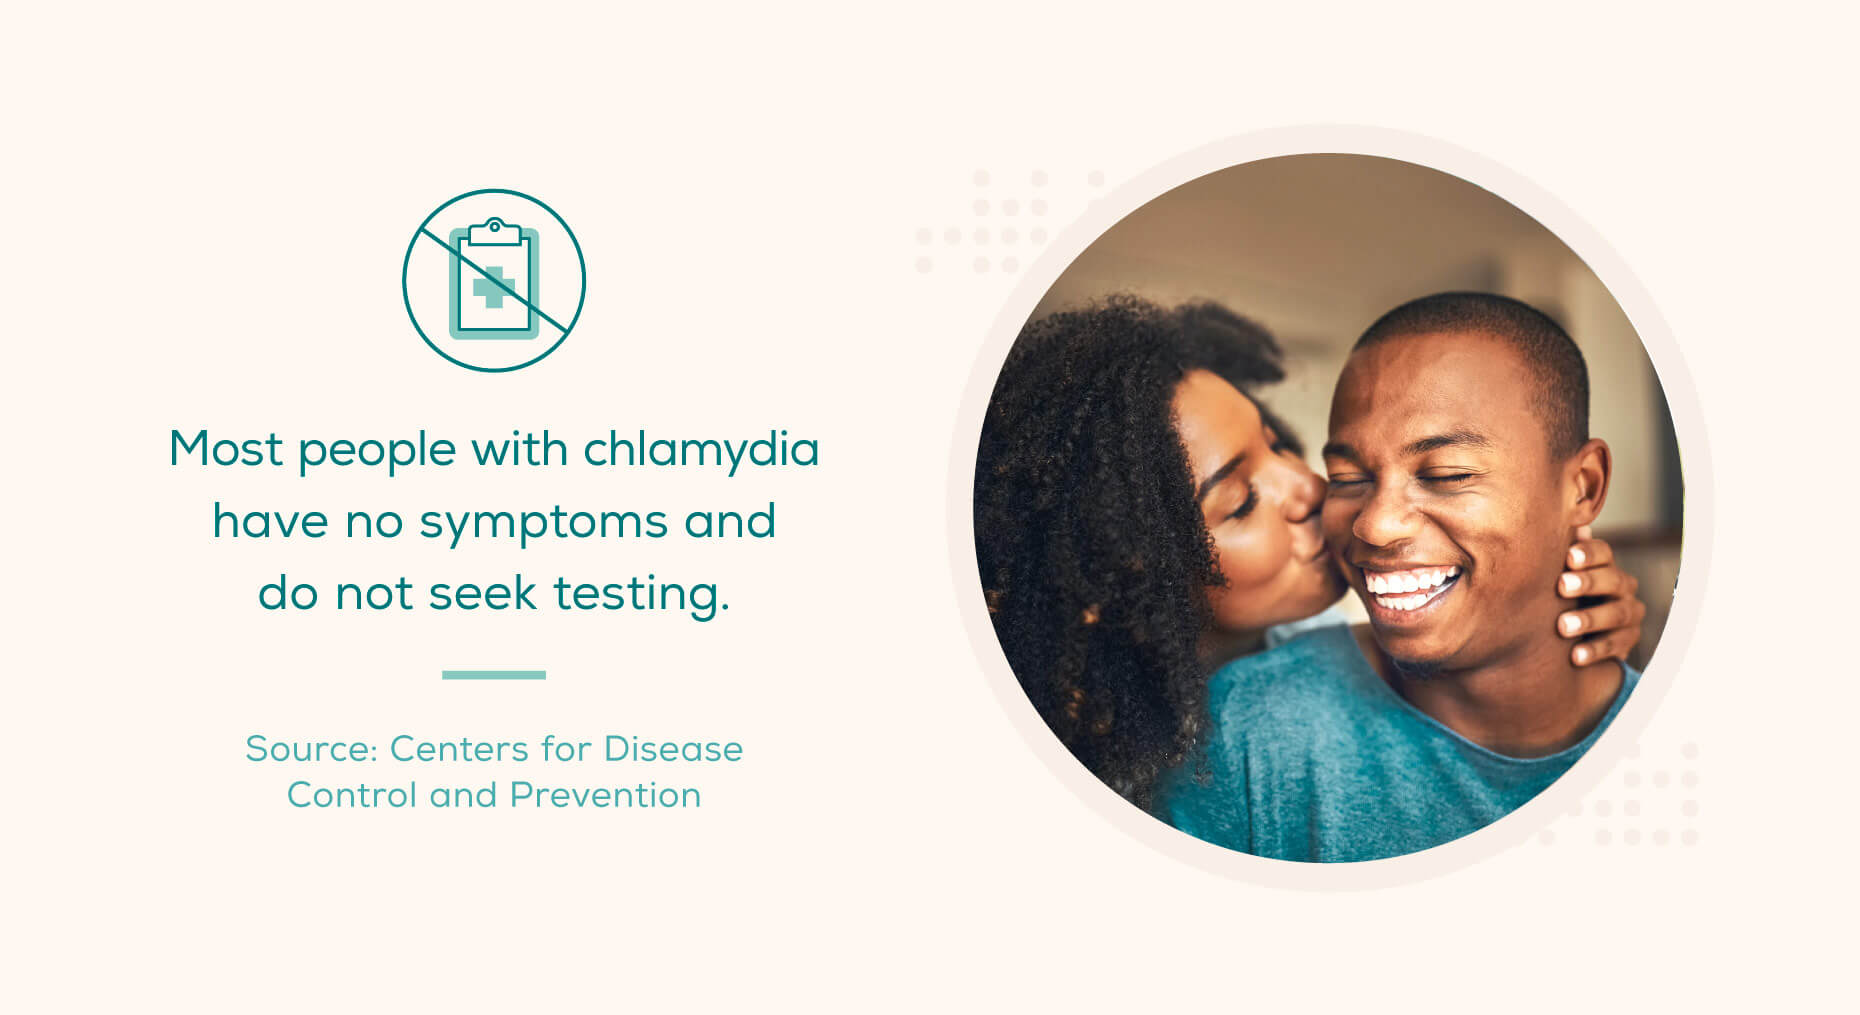 Most people with chlamydia have no symptoms and do not seek testing